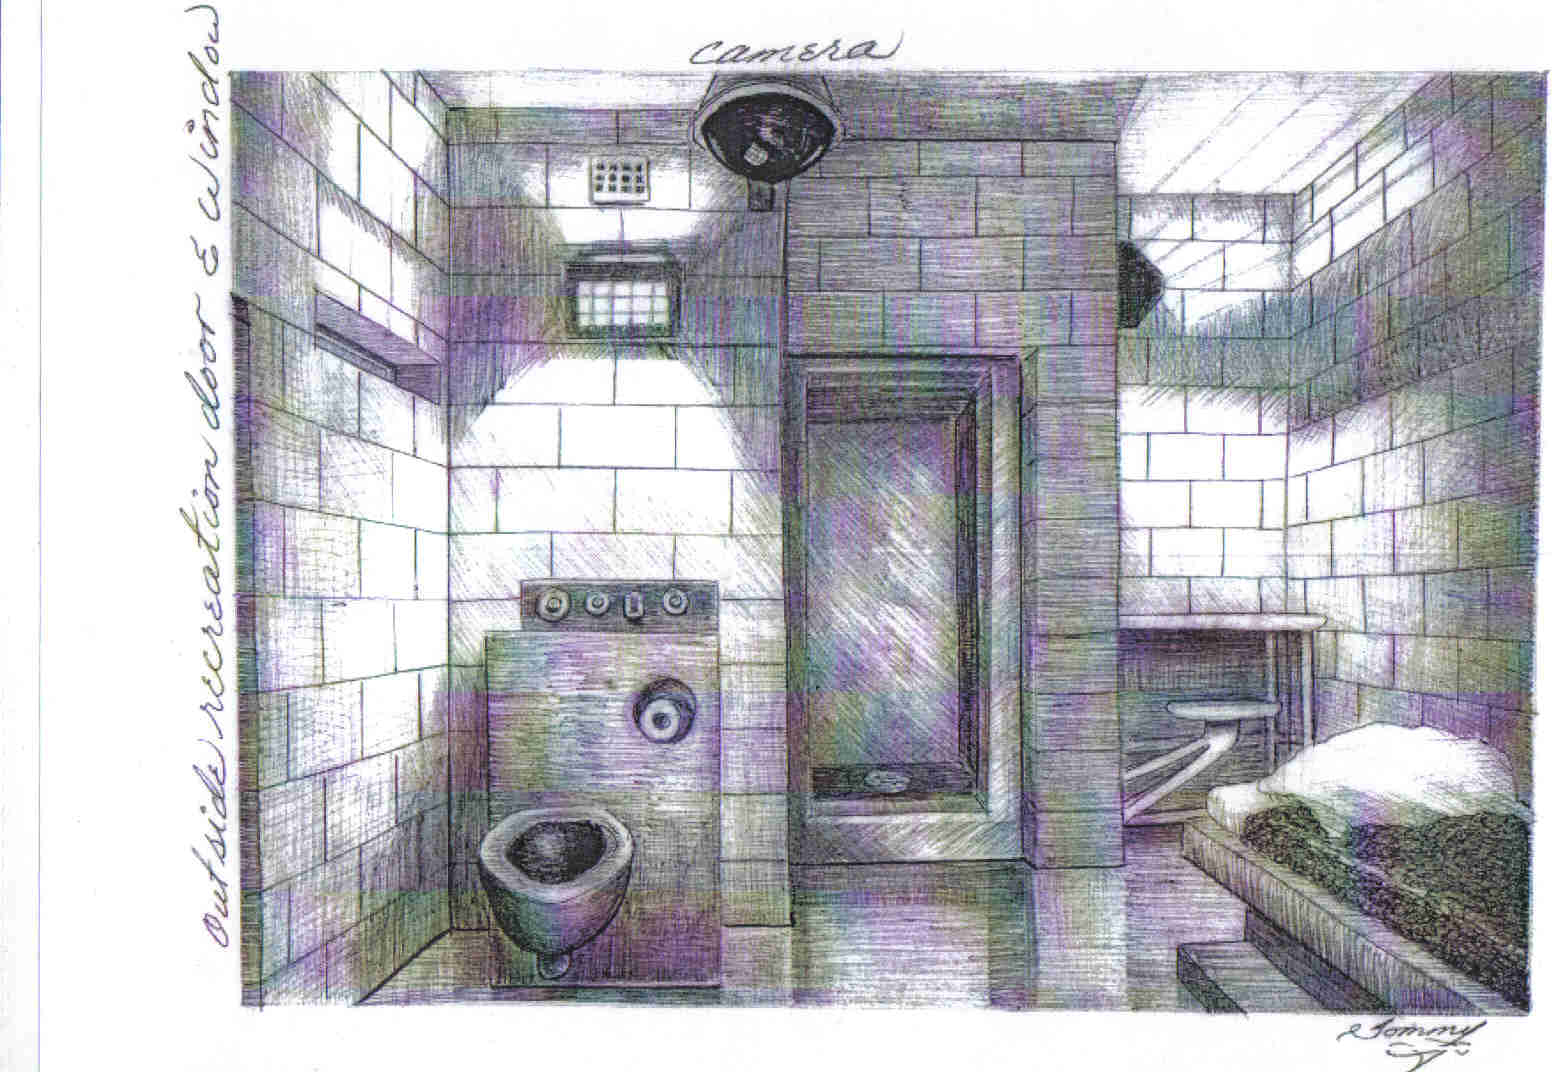 Thomas Silversteins sketch of the inside of his cell. Hes been in solitary confinement since 1983, longer than any prisoner in the U.S. federal system.